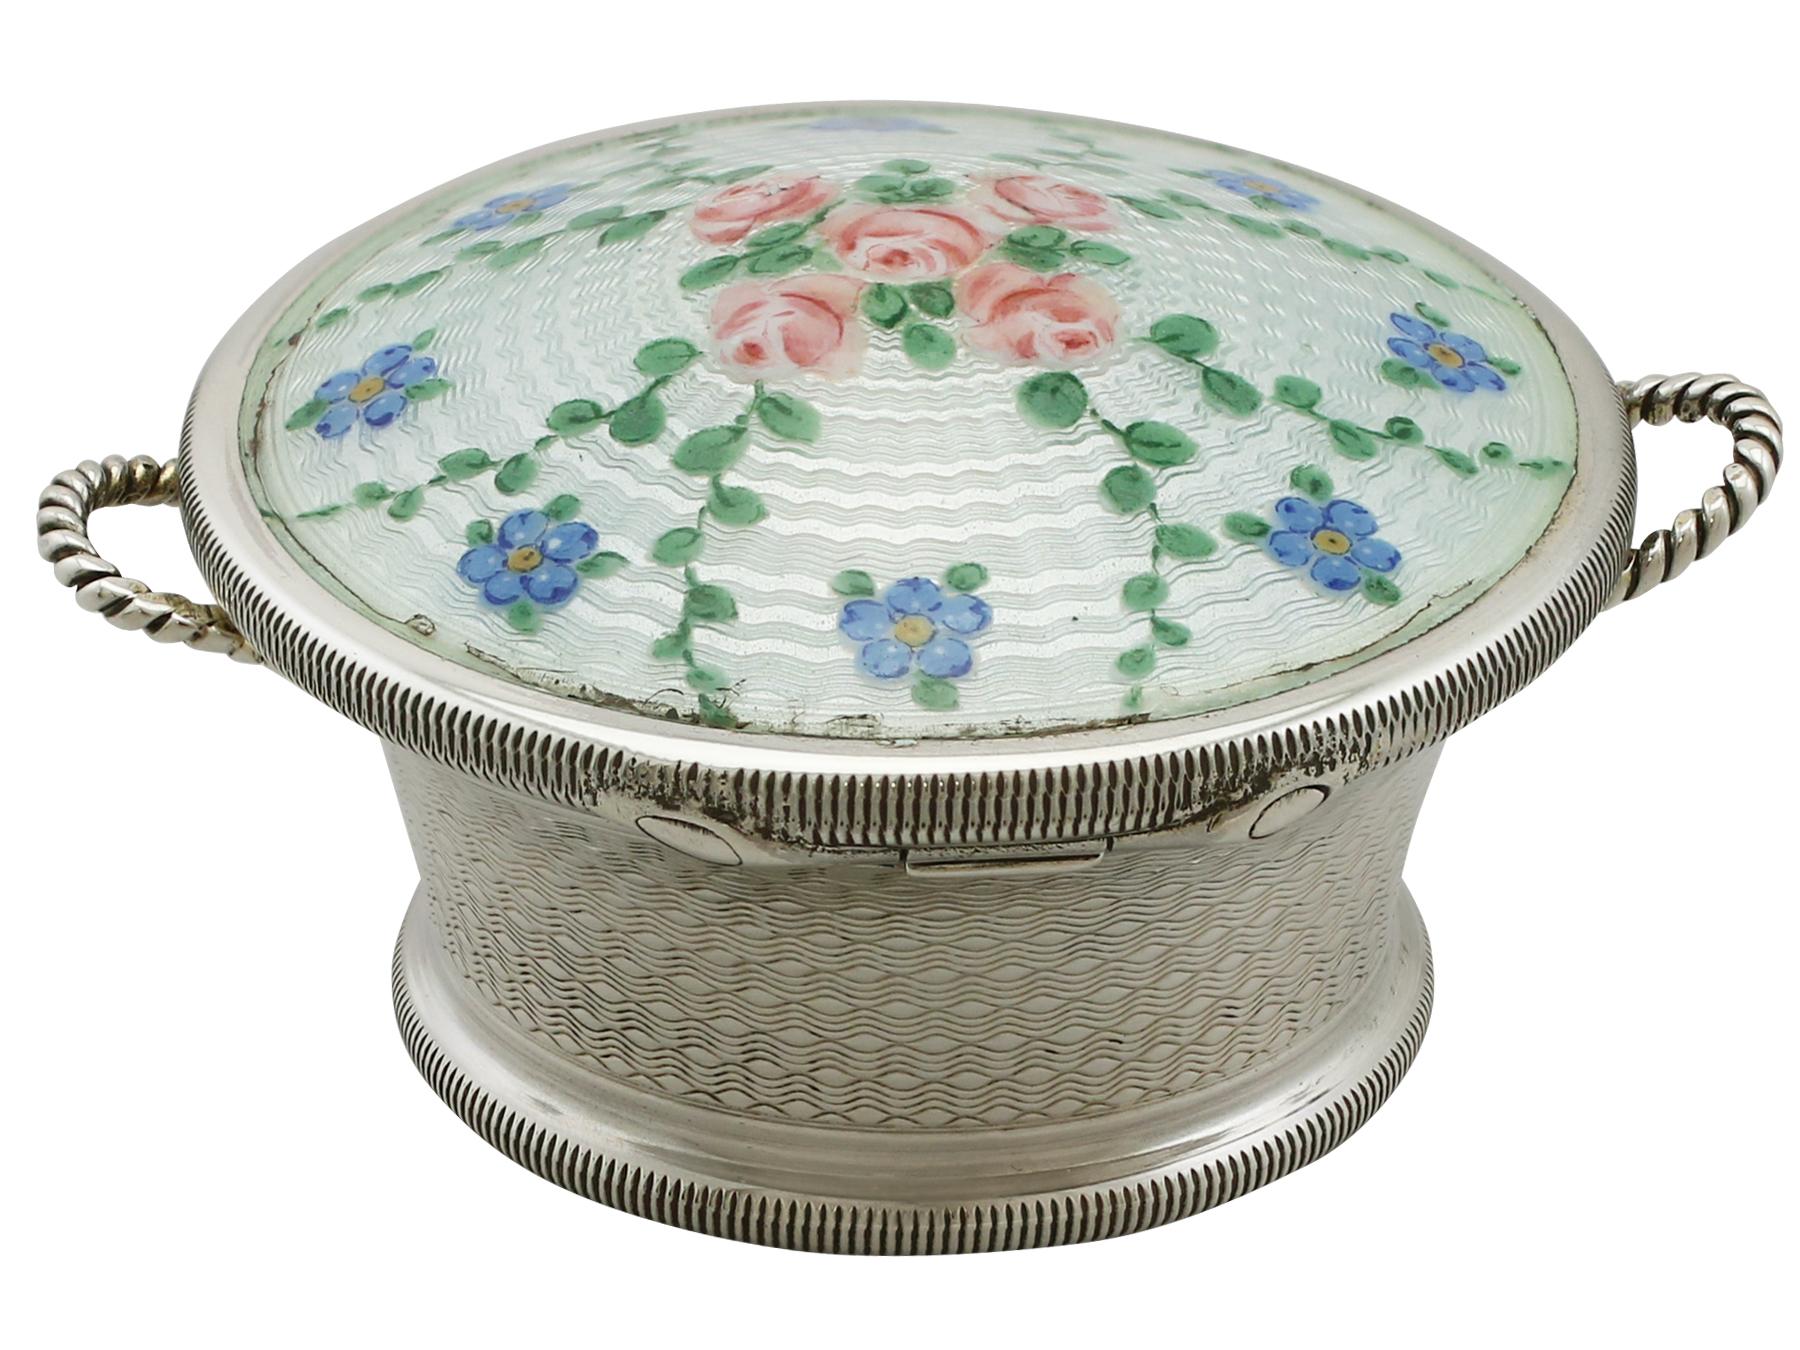 English Antique Sterling Silver and Enamel Trinket Box by Levi and Salaman